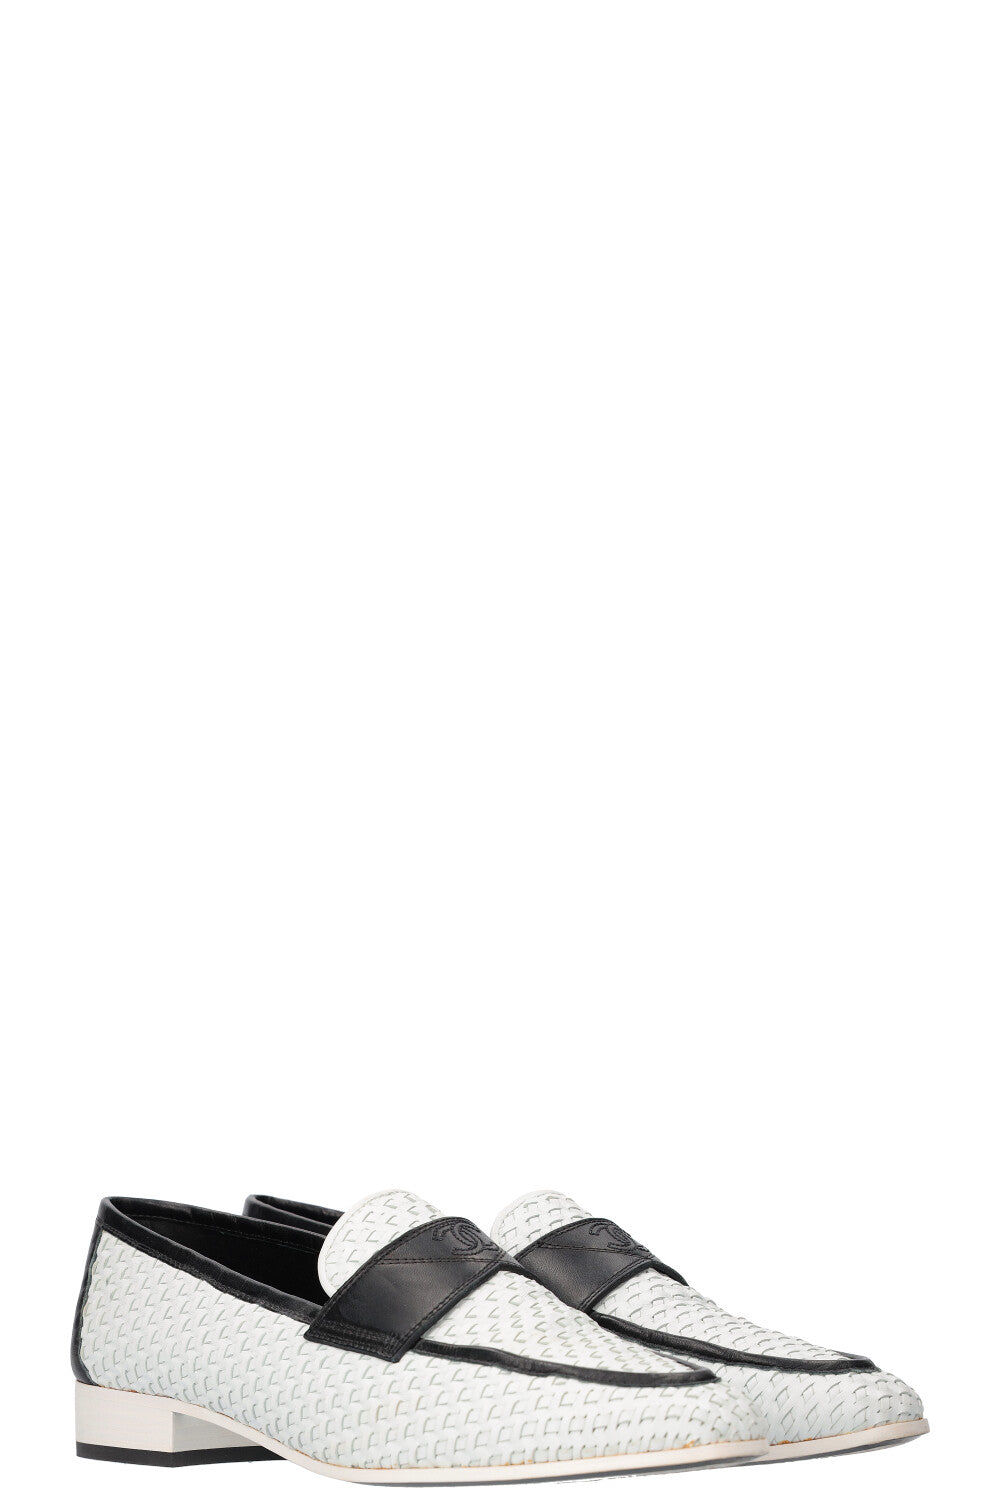 Chanel Loafers Black White Resort 2017 Cuba Collection